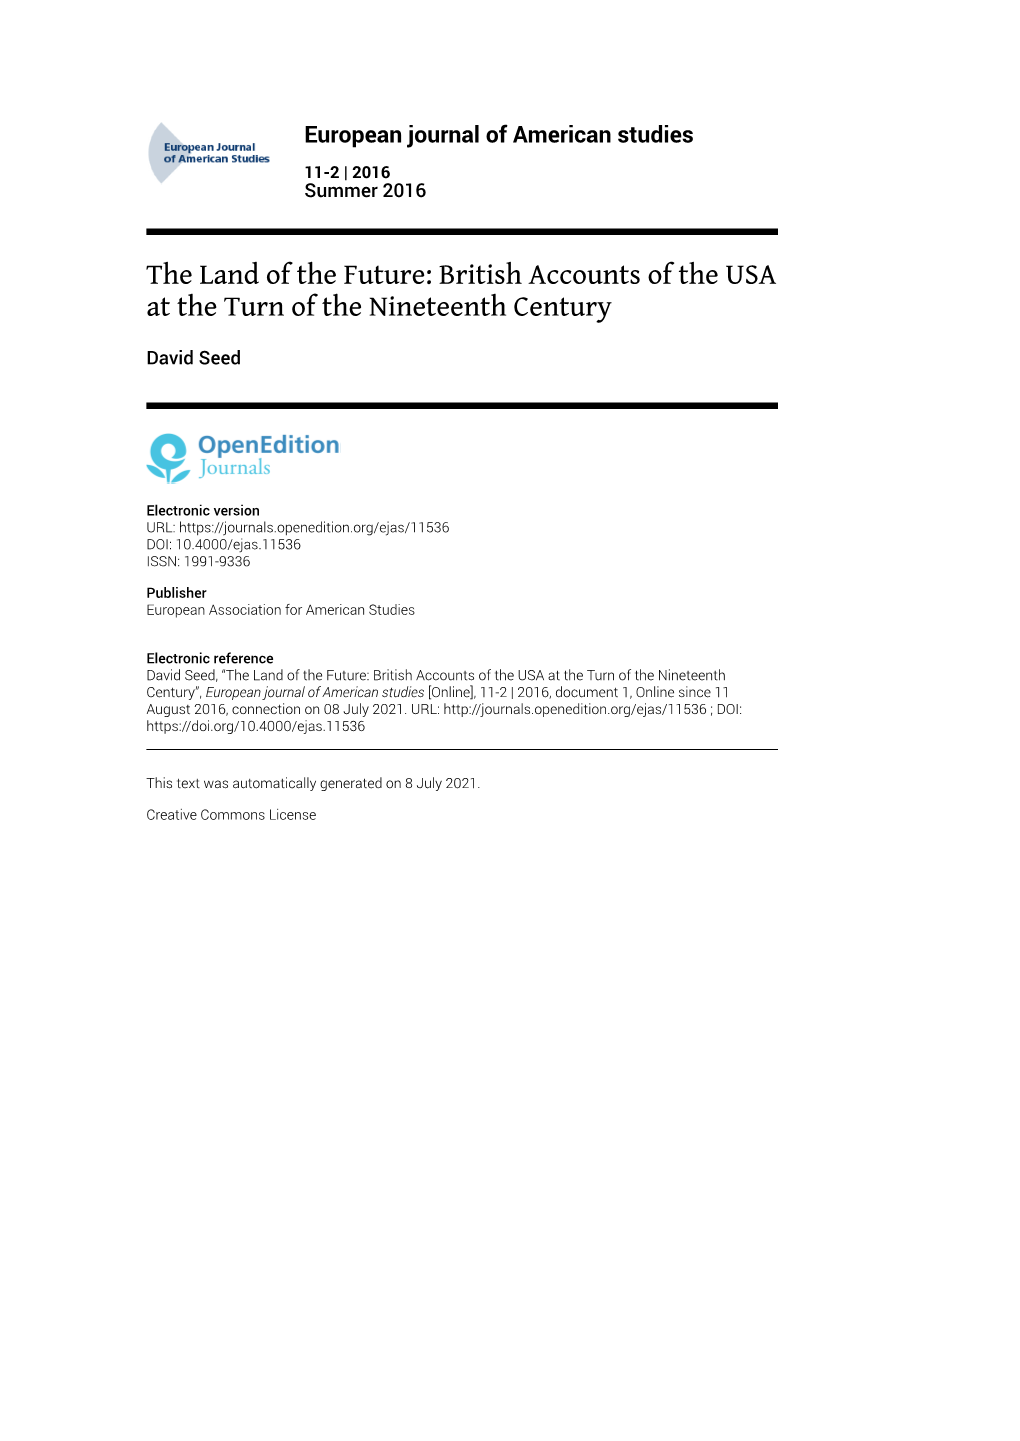 European Journal of American Studies, 11-2 | 2016 the Land of the Future: British Accounts of the USA at the Turn of the Ninete